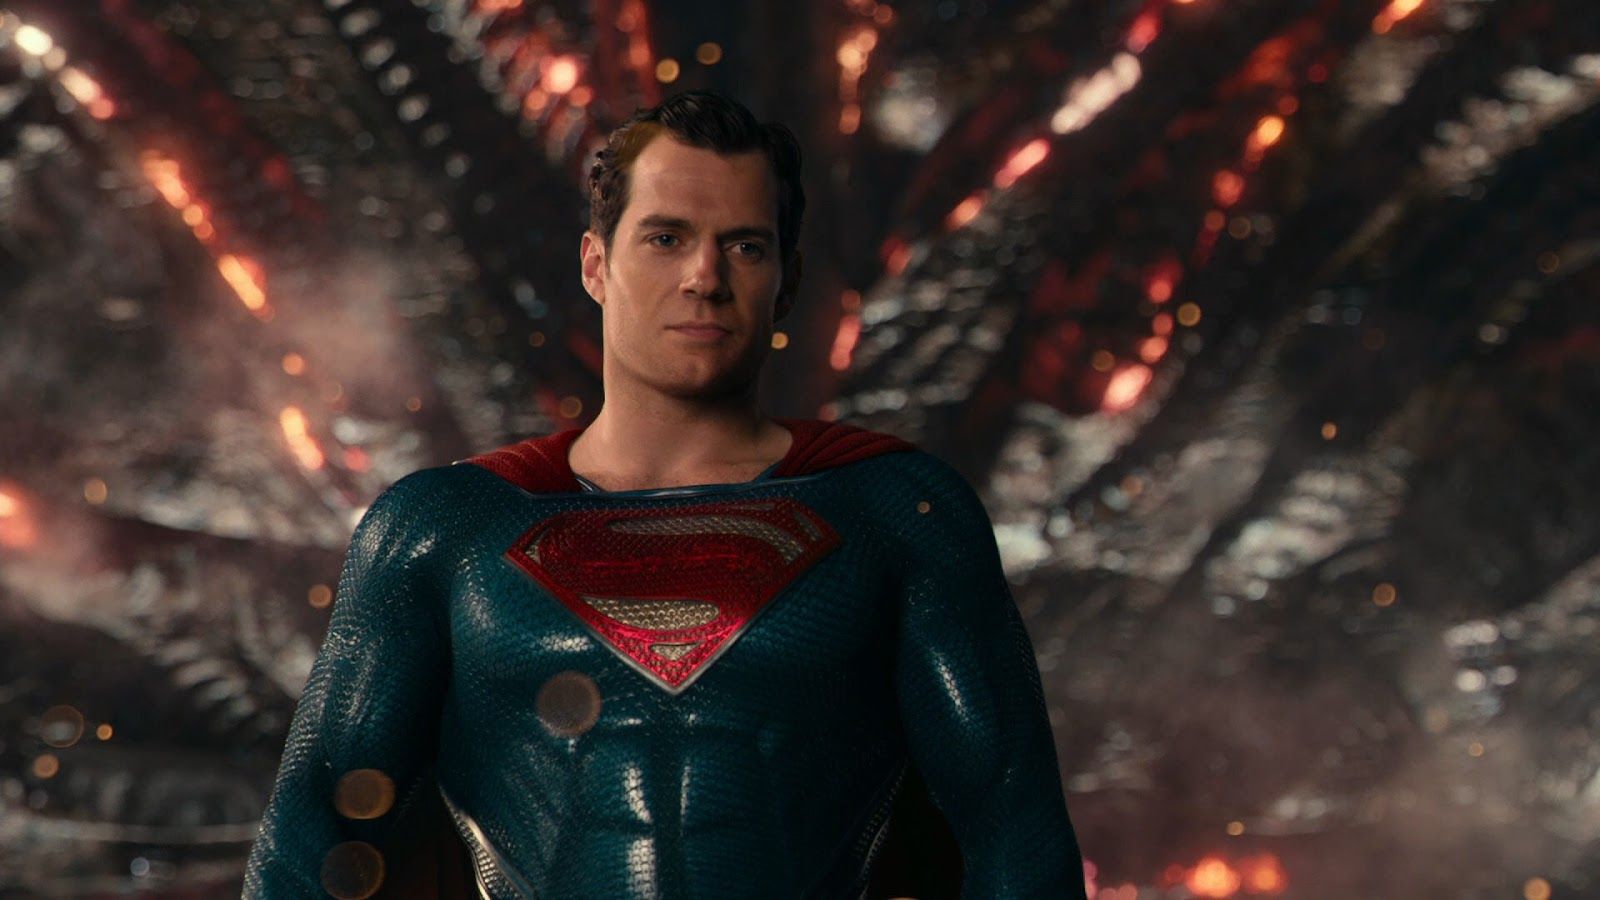 Henry Cavill as Superman in Justice League